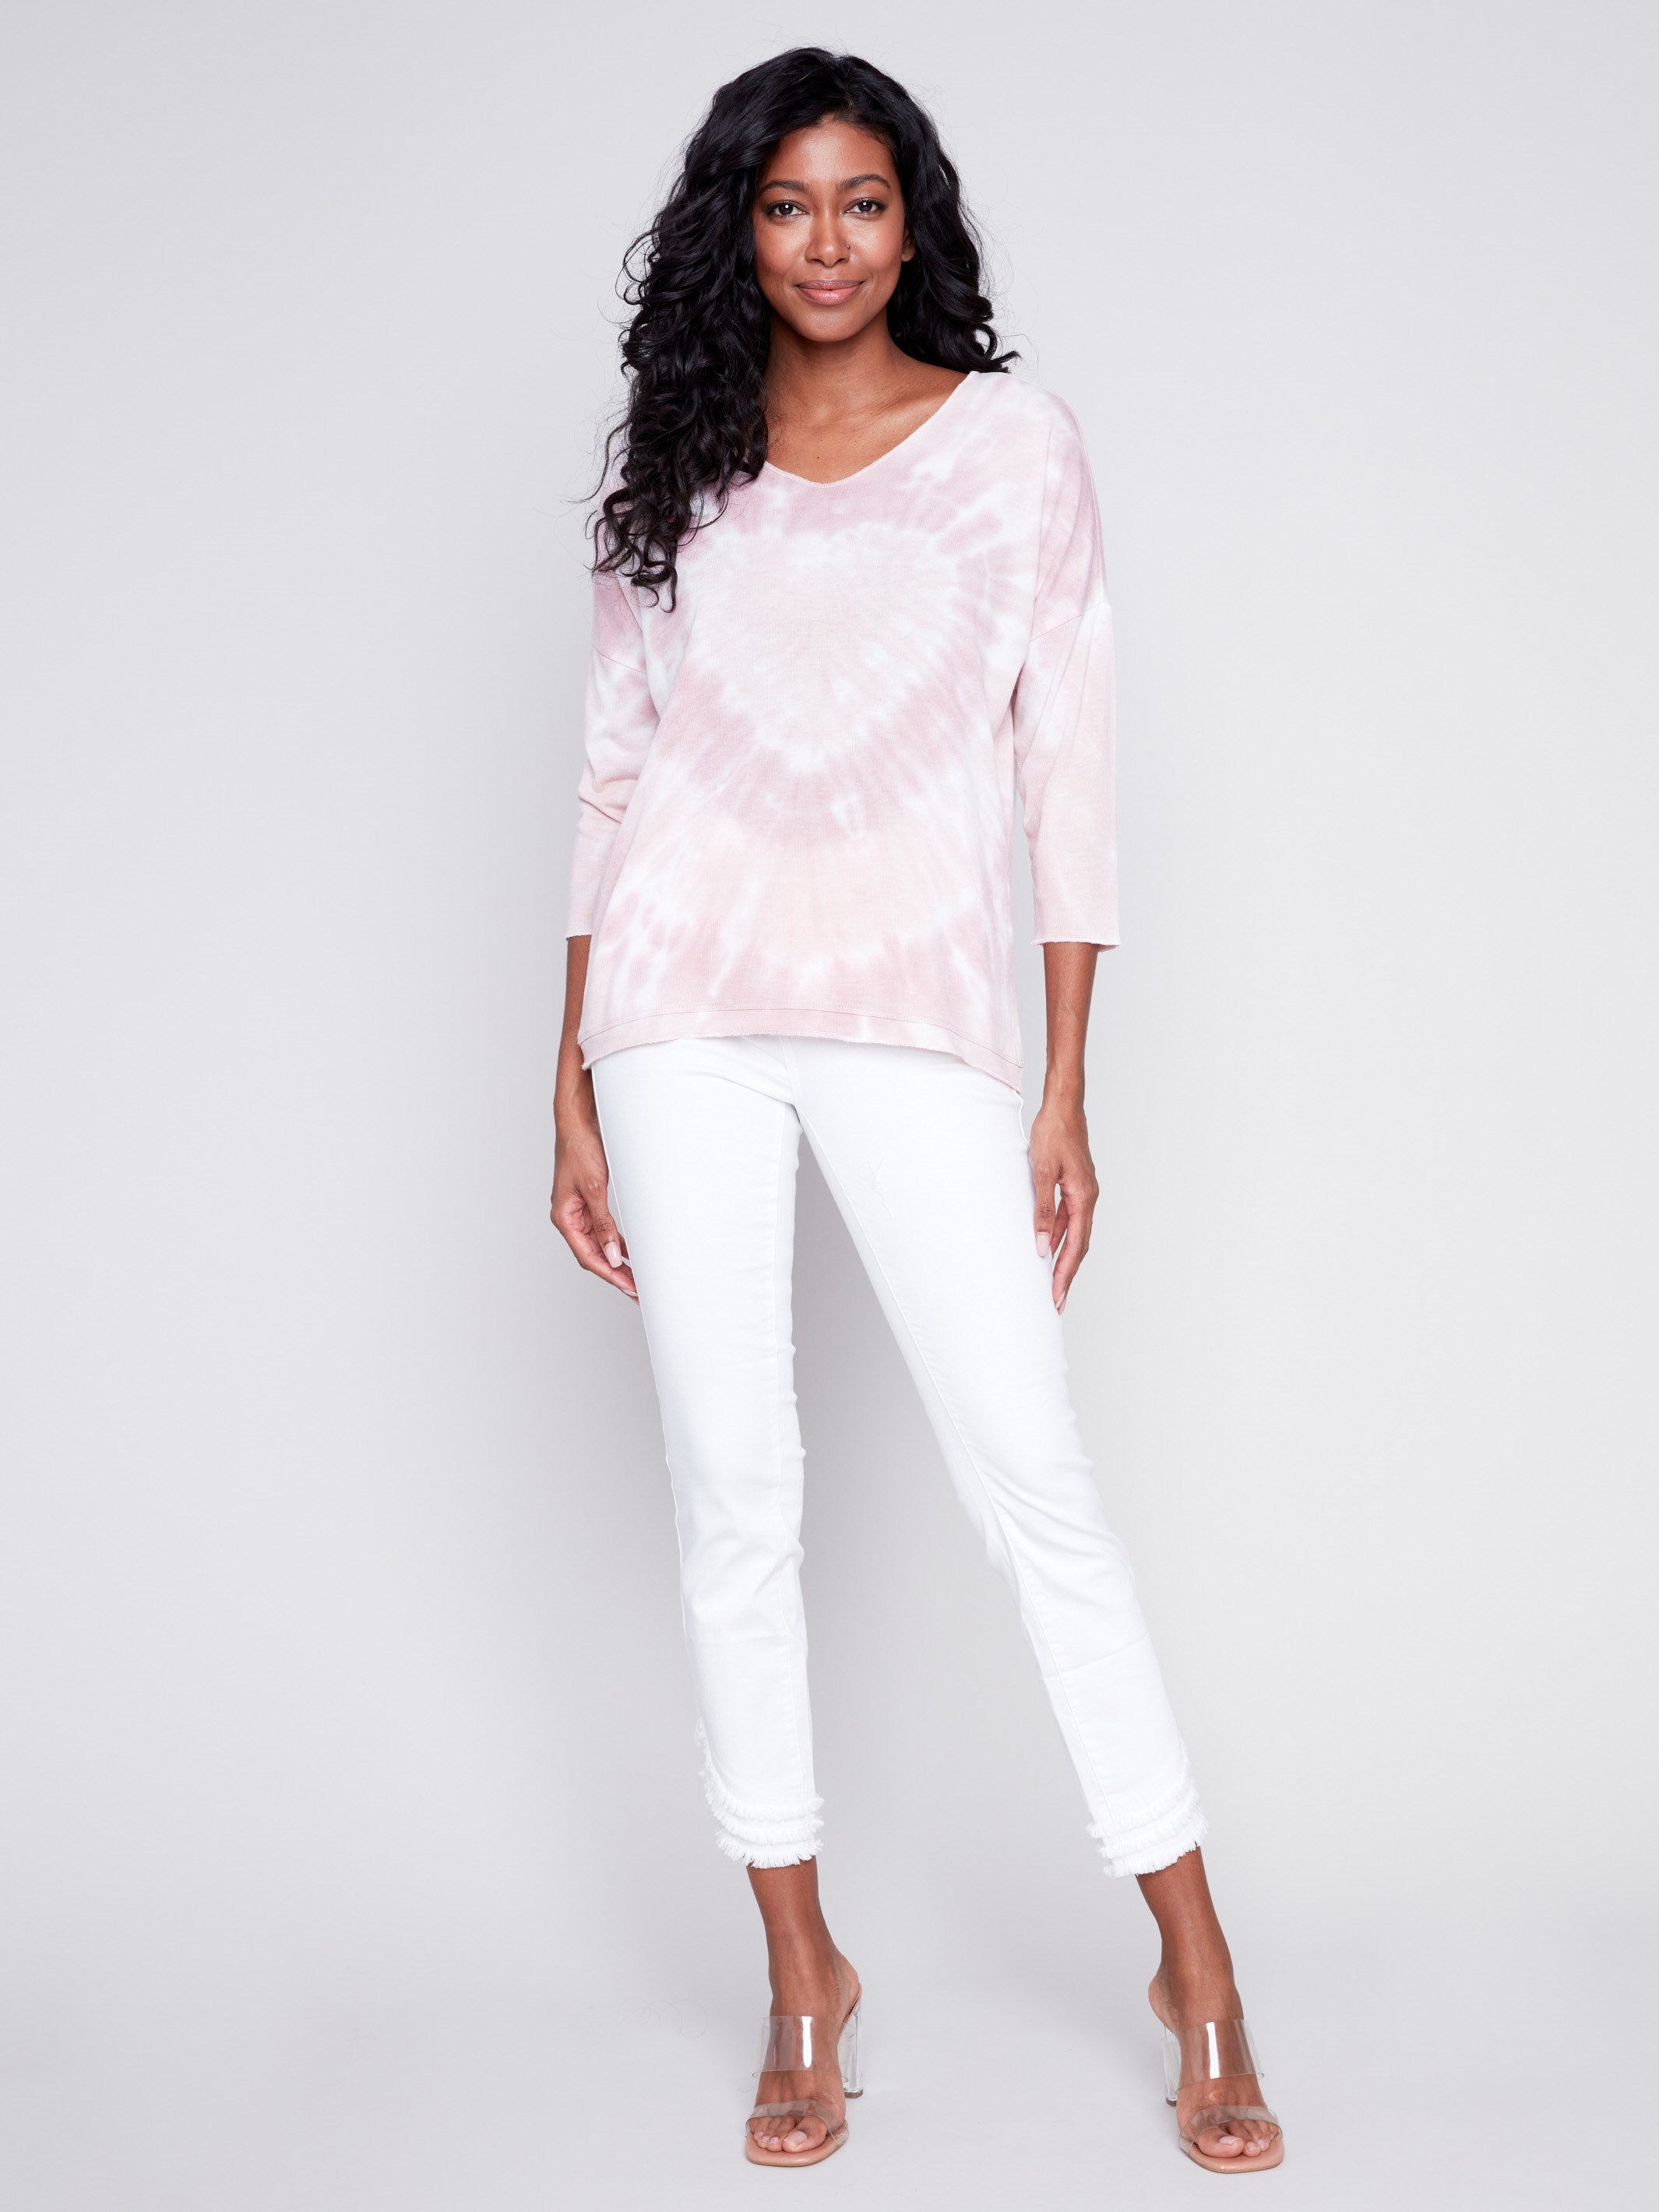 Tie Dye V-Neck Knit Top - Dusty Rose - Charlie B Collection Canada - Image 3